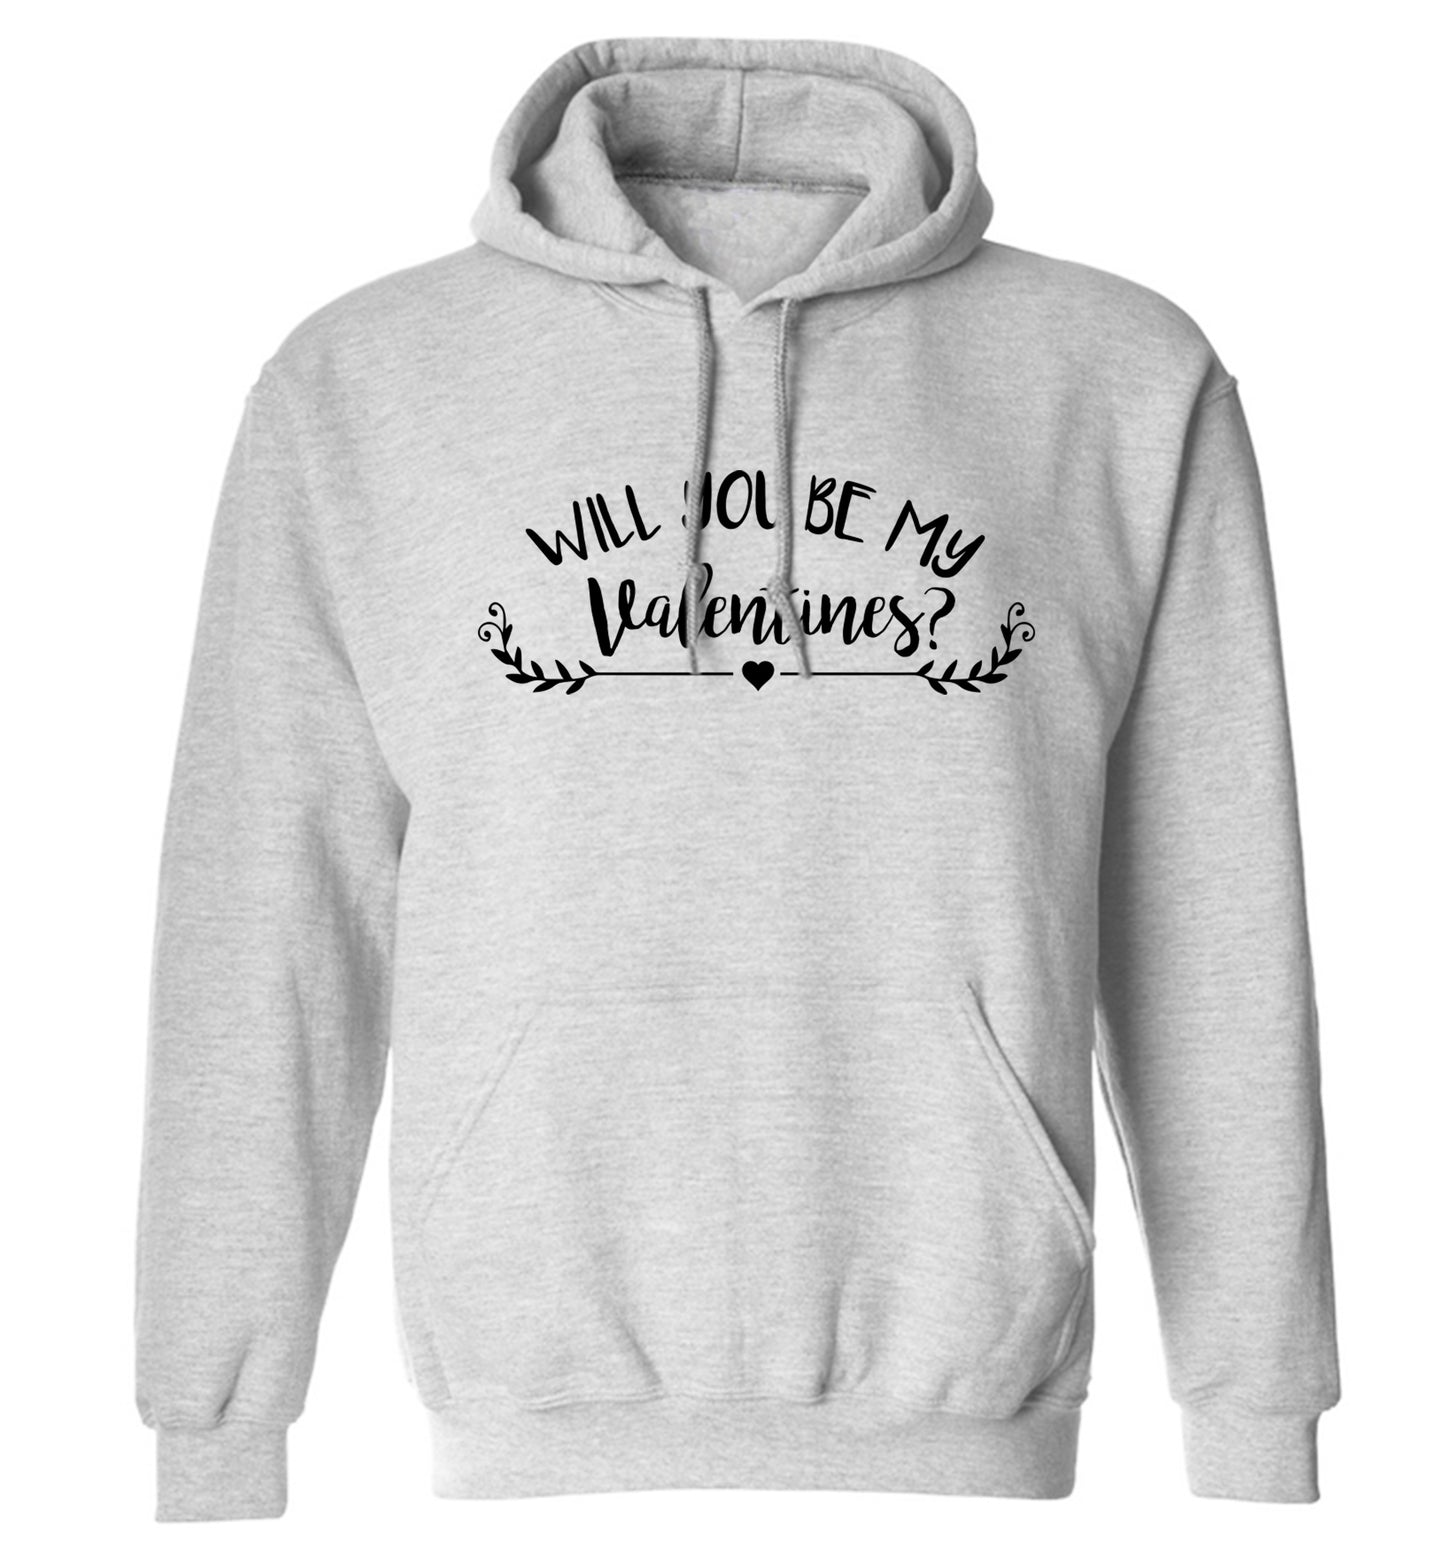 Will you be my valentines? adults unisex grey hoodie 2XL